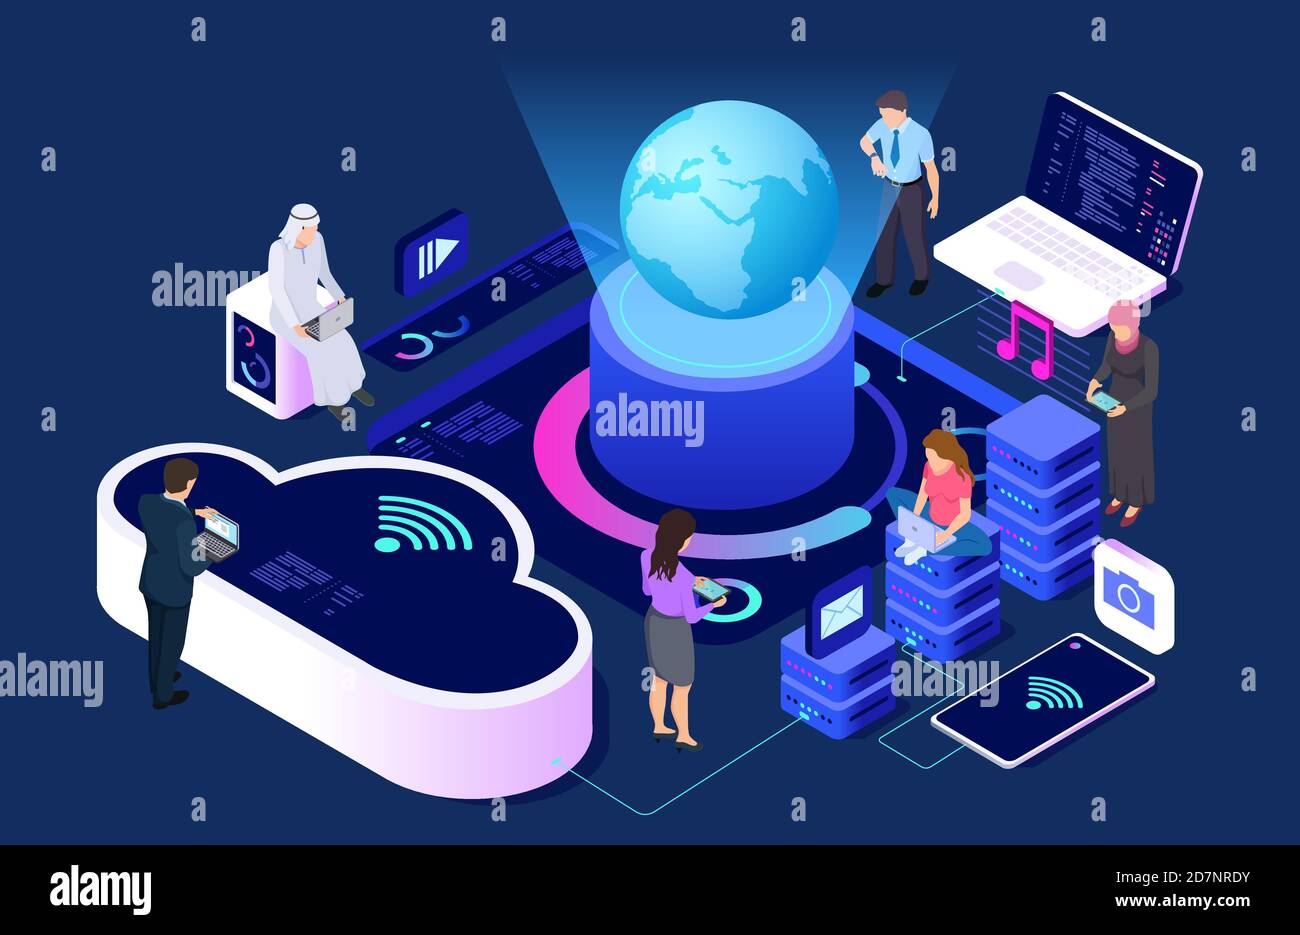 Social network and cloud service vector concept. Isometric connecting people with wi-fi and devices illustration. Internet cloud network, device computer connect Stock Vector